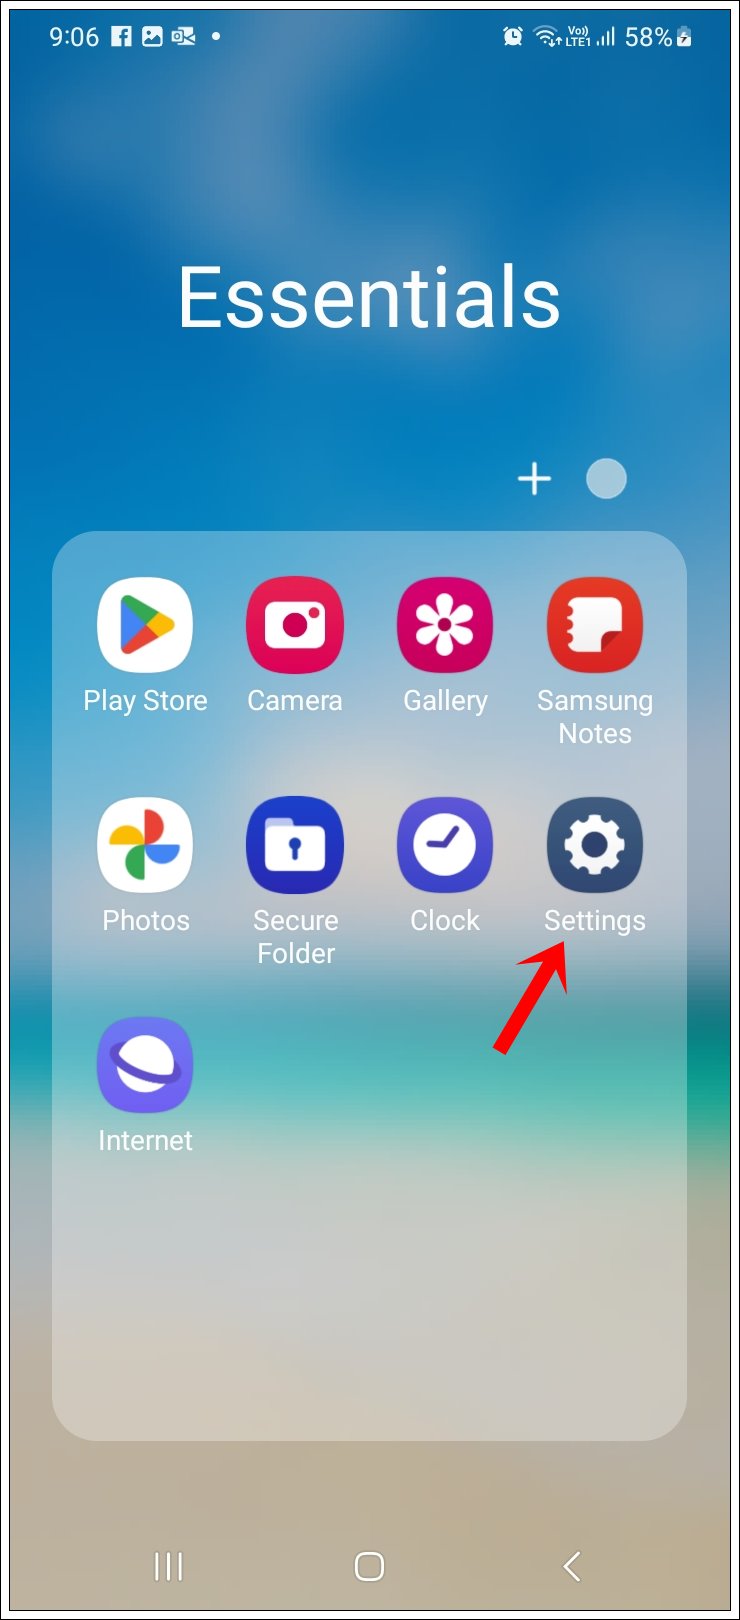 This image shows a screenshot of a Samsung Galaxy phone with its 'Settings' app icon (Gear Icon) highlighted.